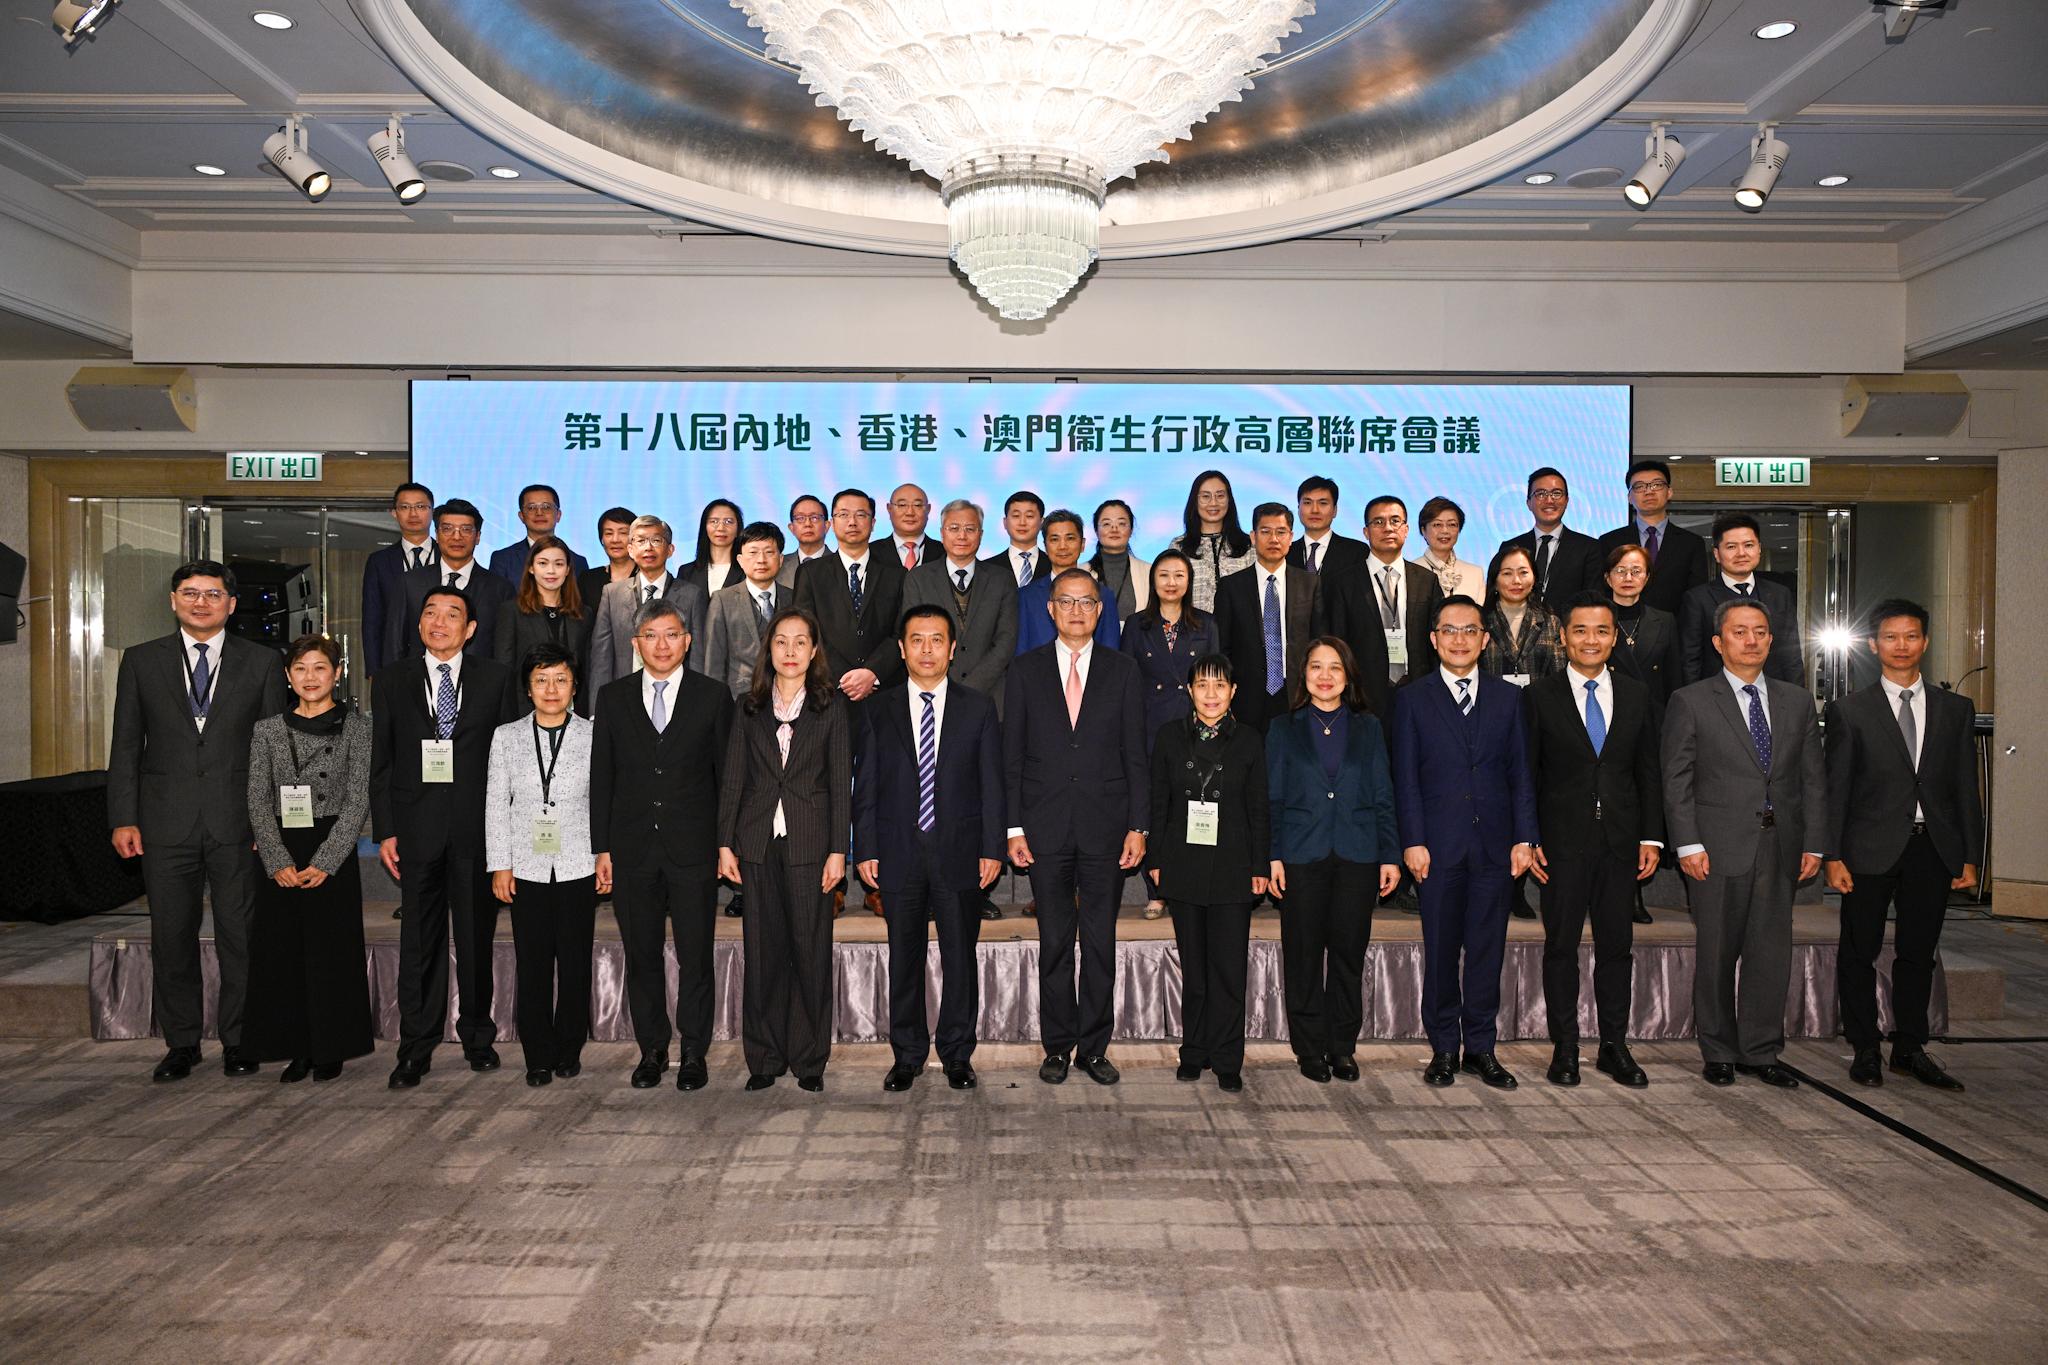 The 18th Joint Meeting of the Senior Health Officials of the Mainland, Hong Kong and Macao was held today (December 18) in Hong Kong. Photo shows the Secretary for Health, Professor Lo Chung-mau (front row, seventh right); Vice-minister of the National Health Commission Mr Lei Haichao (front row, seventh left); the Secretary for Social Affairs and Culture of the Macao Special Administrative Region, Ms Ao Ieong U (front row, sixth left); the Permanent Secretary for Health, Mr Thomas Chan (front row, fifth left); the Director of Health, Dr Ronald Lam (front row, fourth right); the Chairman of the Hospital Authority (HA), Mr Henry Fan (front row, third left); the Chief Executive of the HA, Dr Tony Ko (front row, first left), with other attendees of the meeting.